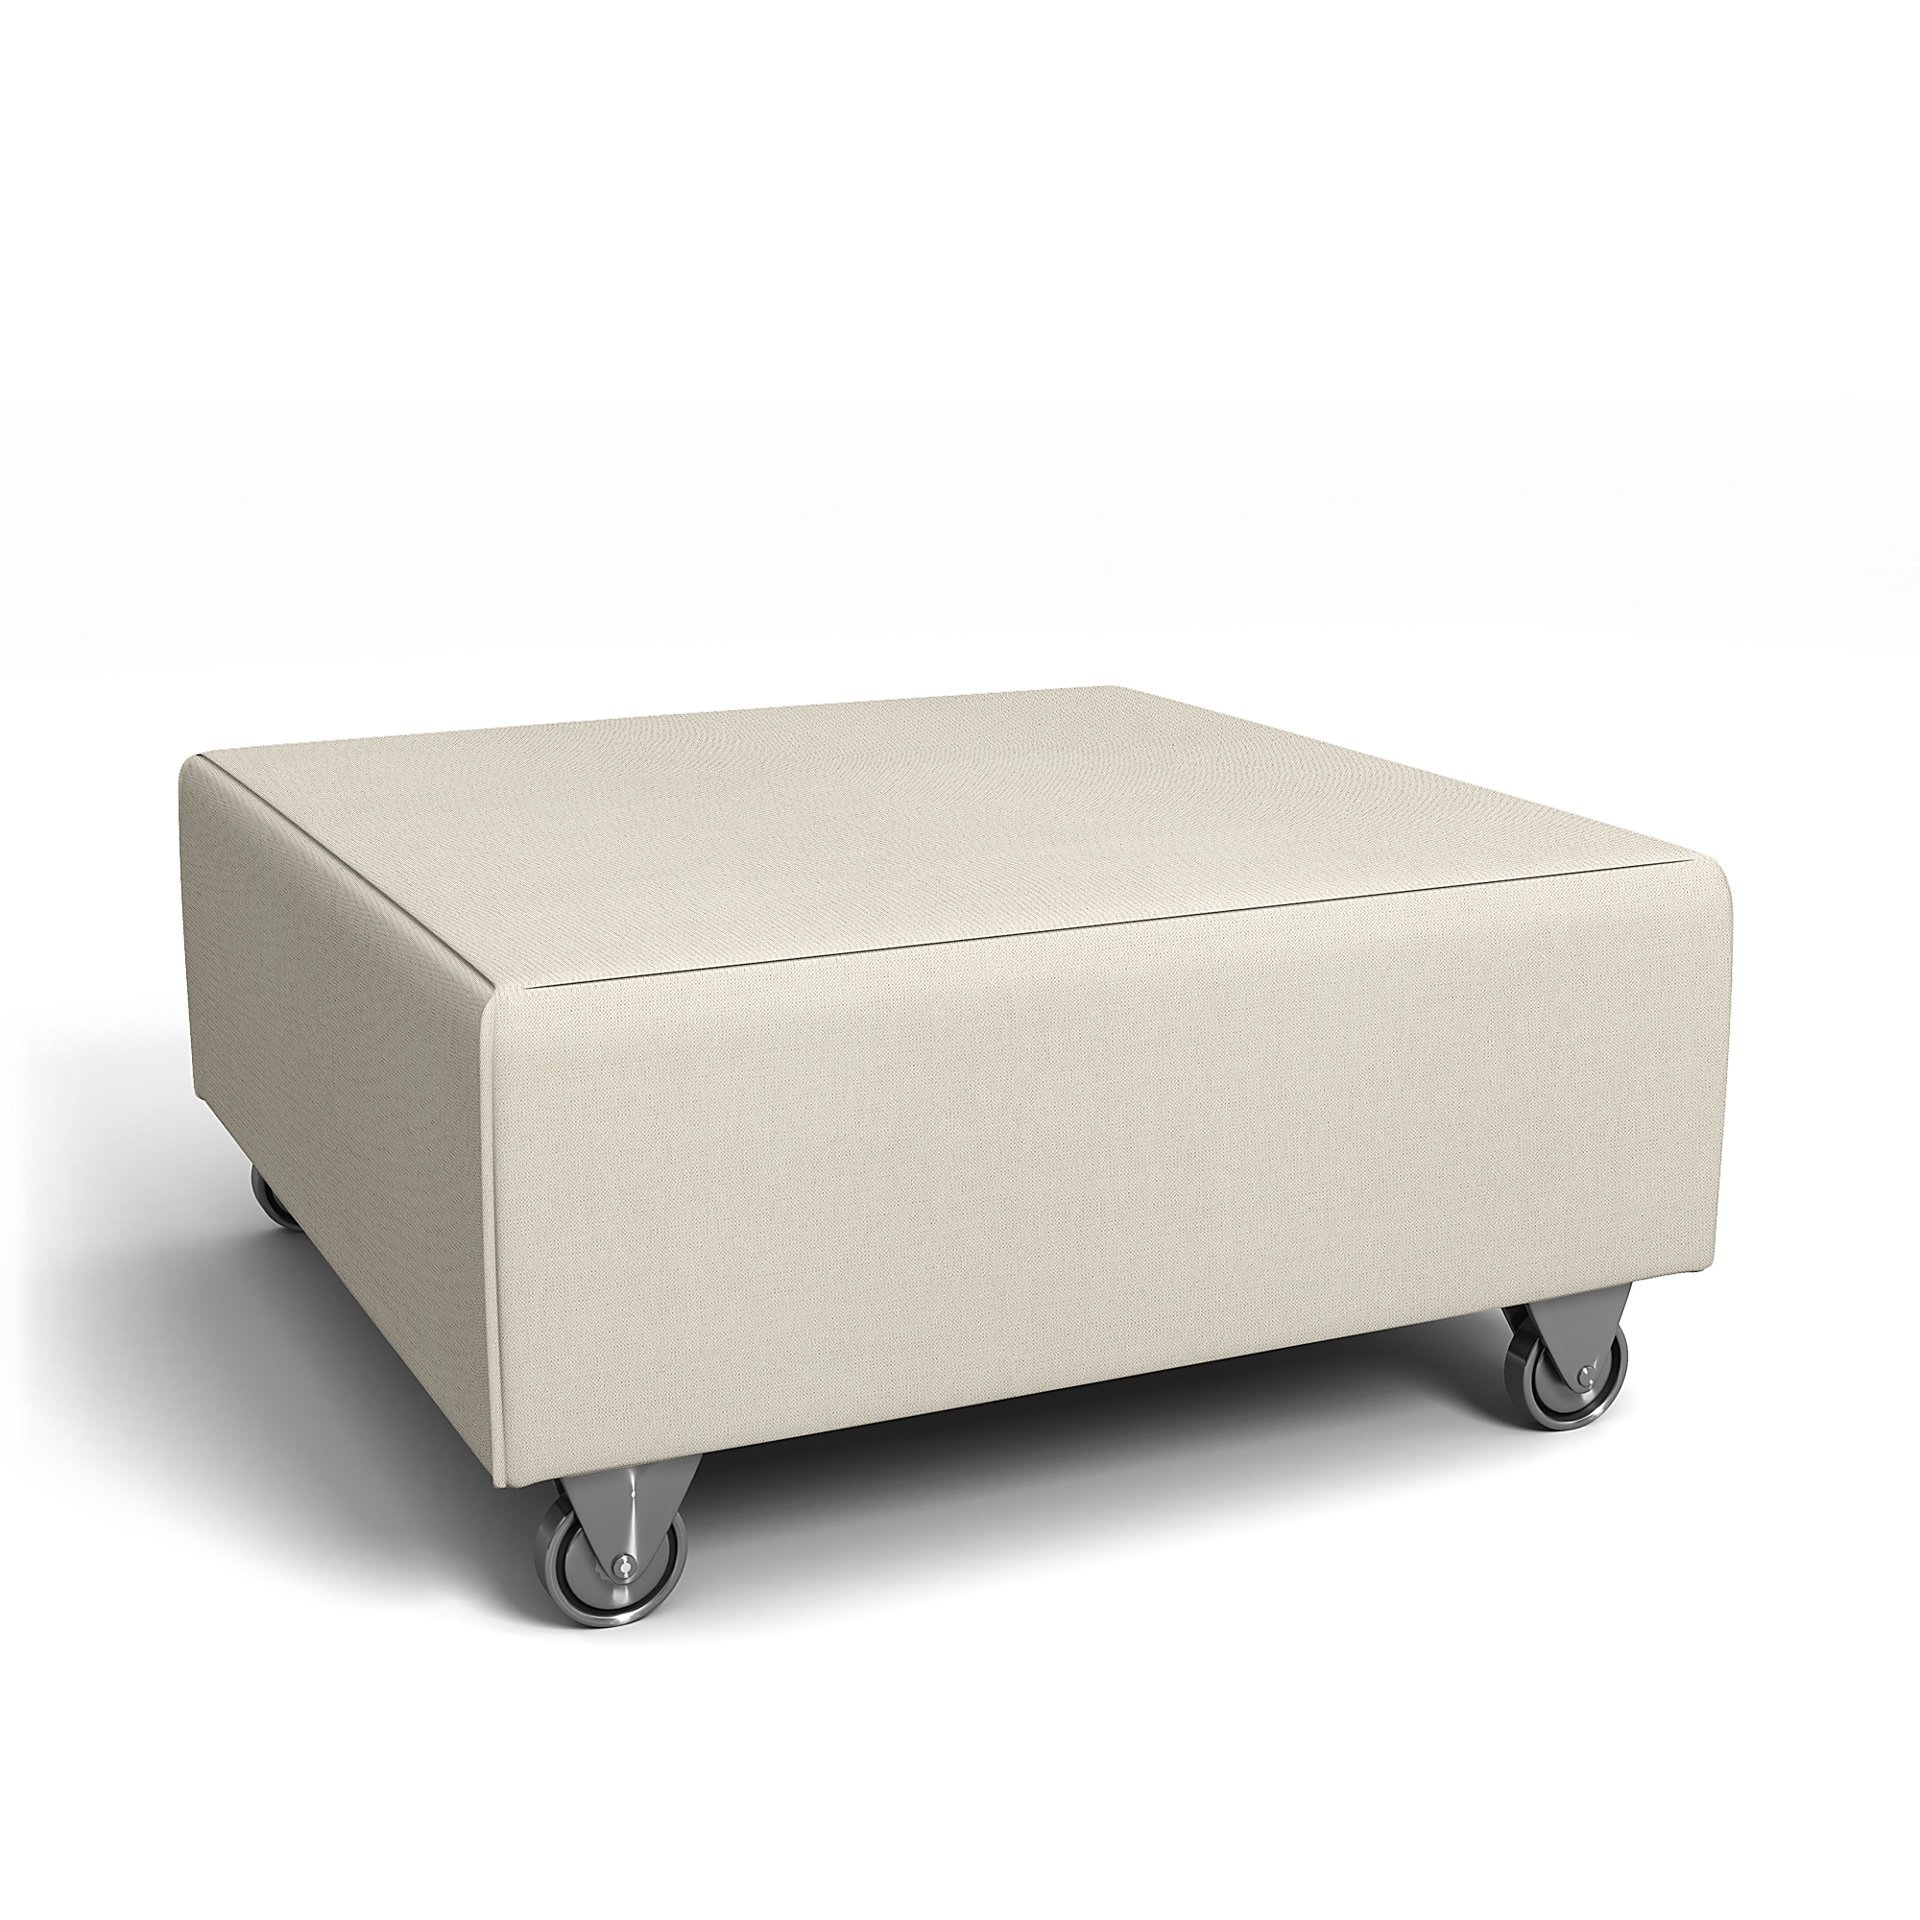 IKEA - Falsterbo Footstool Cover, Unbleached, Linen - Bemz